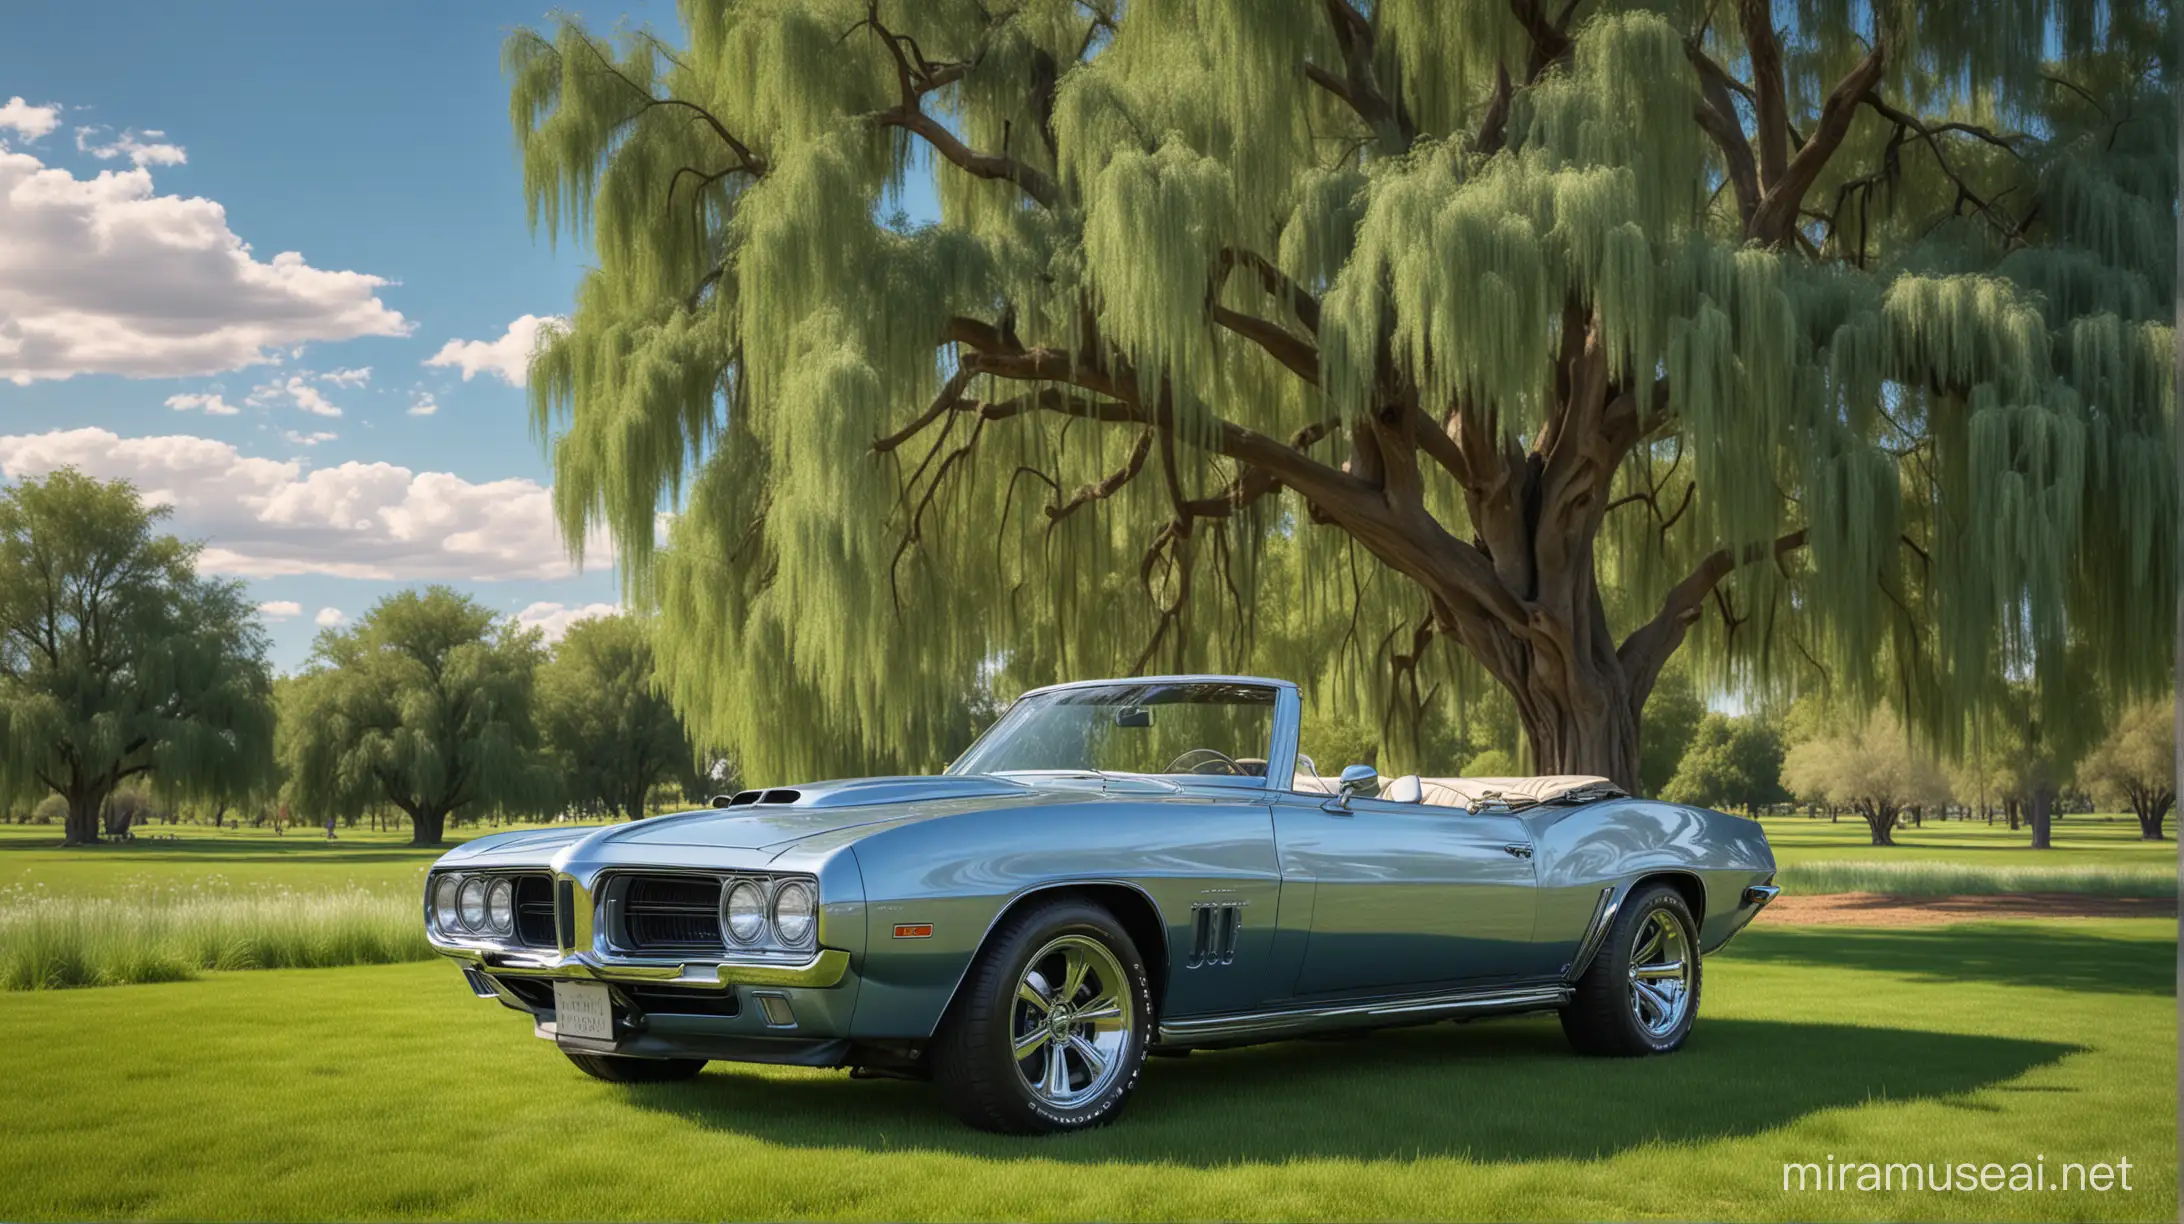 photo realistic of a silver and BLUE chrome 1969 FIREBIRD convertible, big CHROME engine, wide CHROME TIRES, standing amidst a vast expanse of lush green grass IN FRONT OF A LARGE WEEPING WILLOW TREE. CLEAR SUNNY SKY WITH FLUFFY pastel clouds. 32K, 18K, digital, graphic, DD, HDR, UHDR